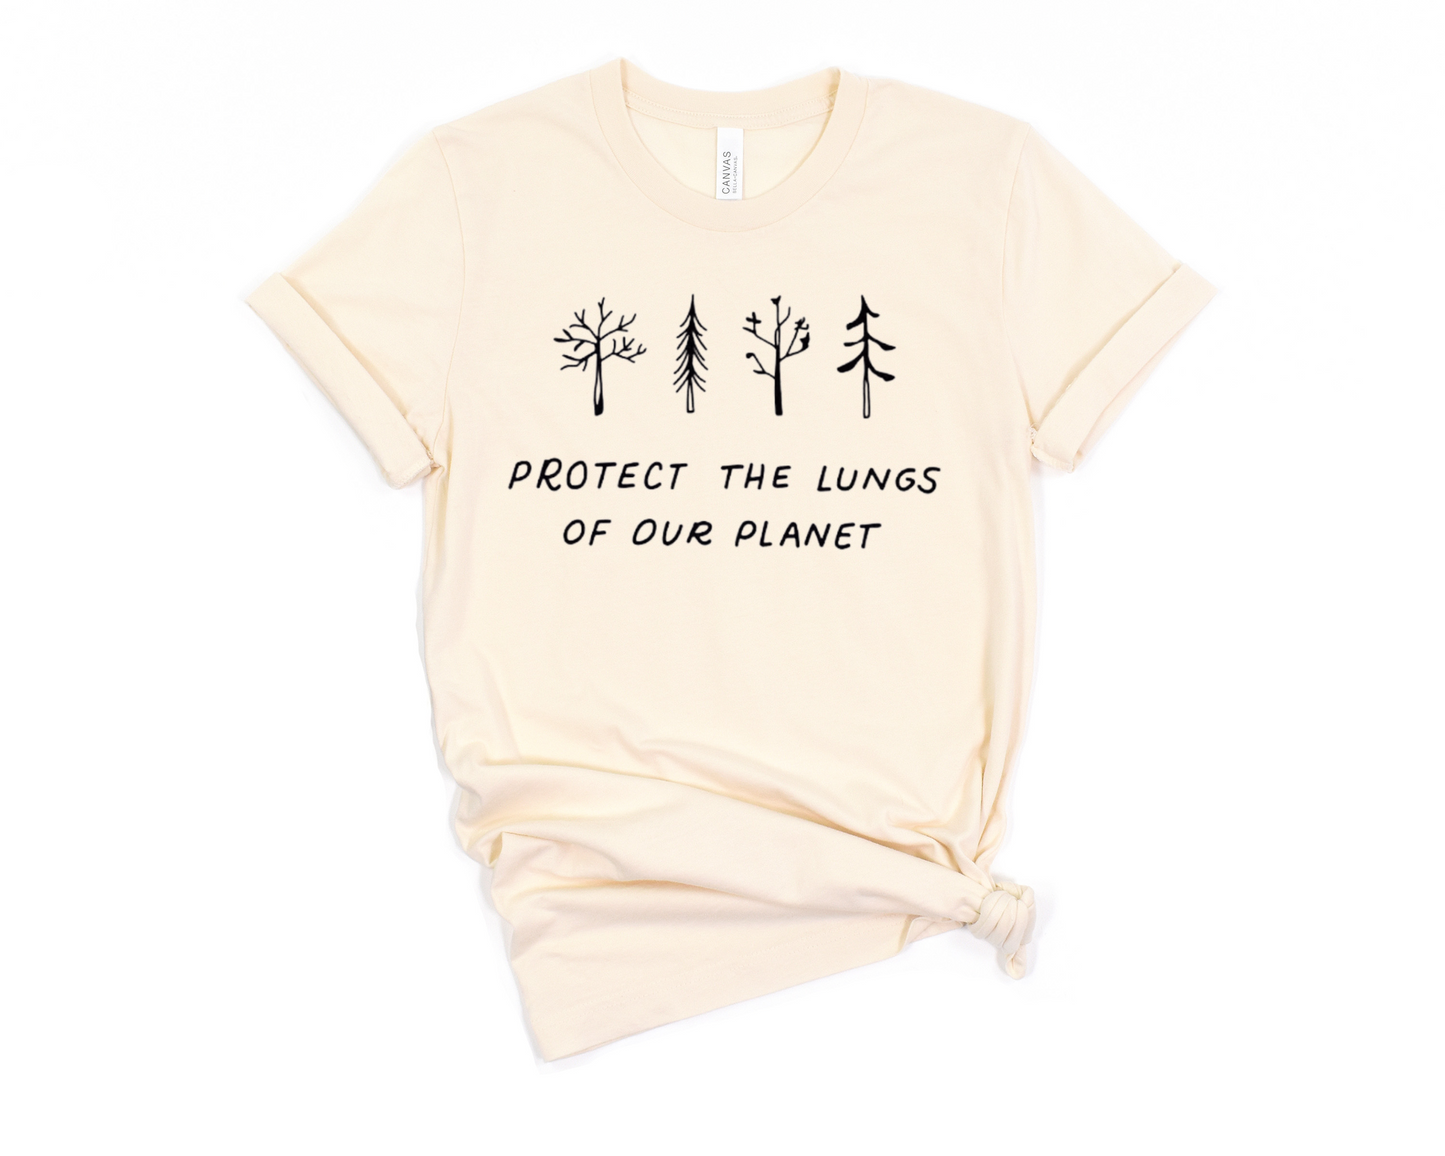 Protect The Lungs of Our Planet T-shirt